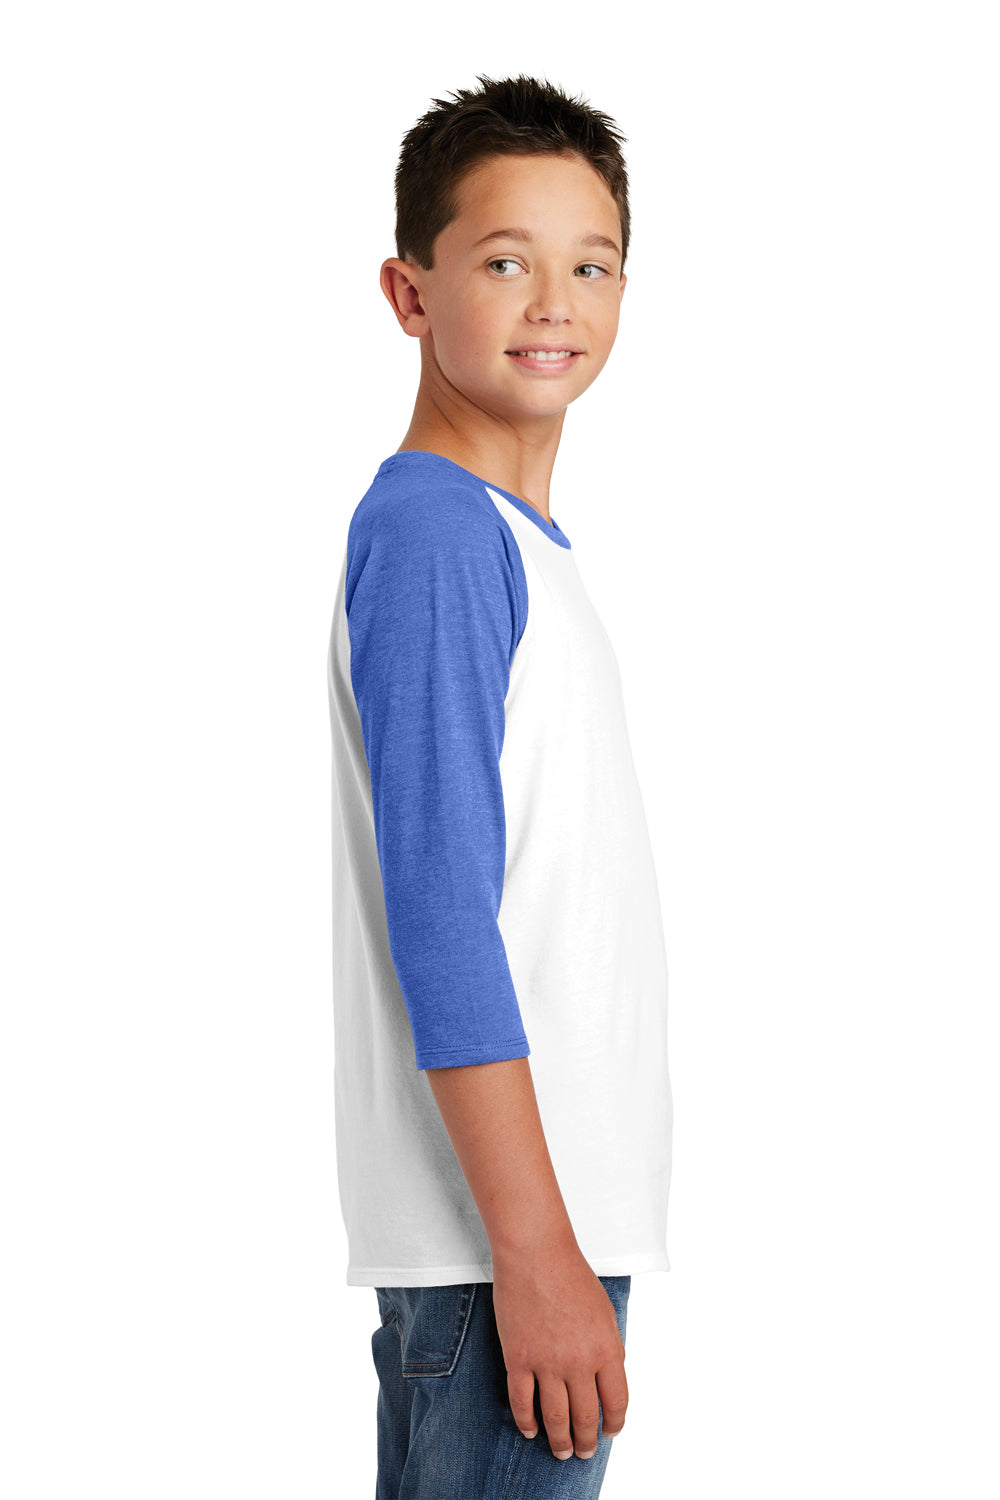 District DT6210Y Youth Very Important 3/4 Sleeve Crewneck T-Shirt White/Heather Royal Blue Side